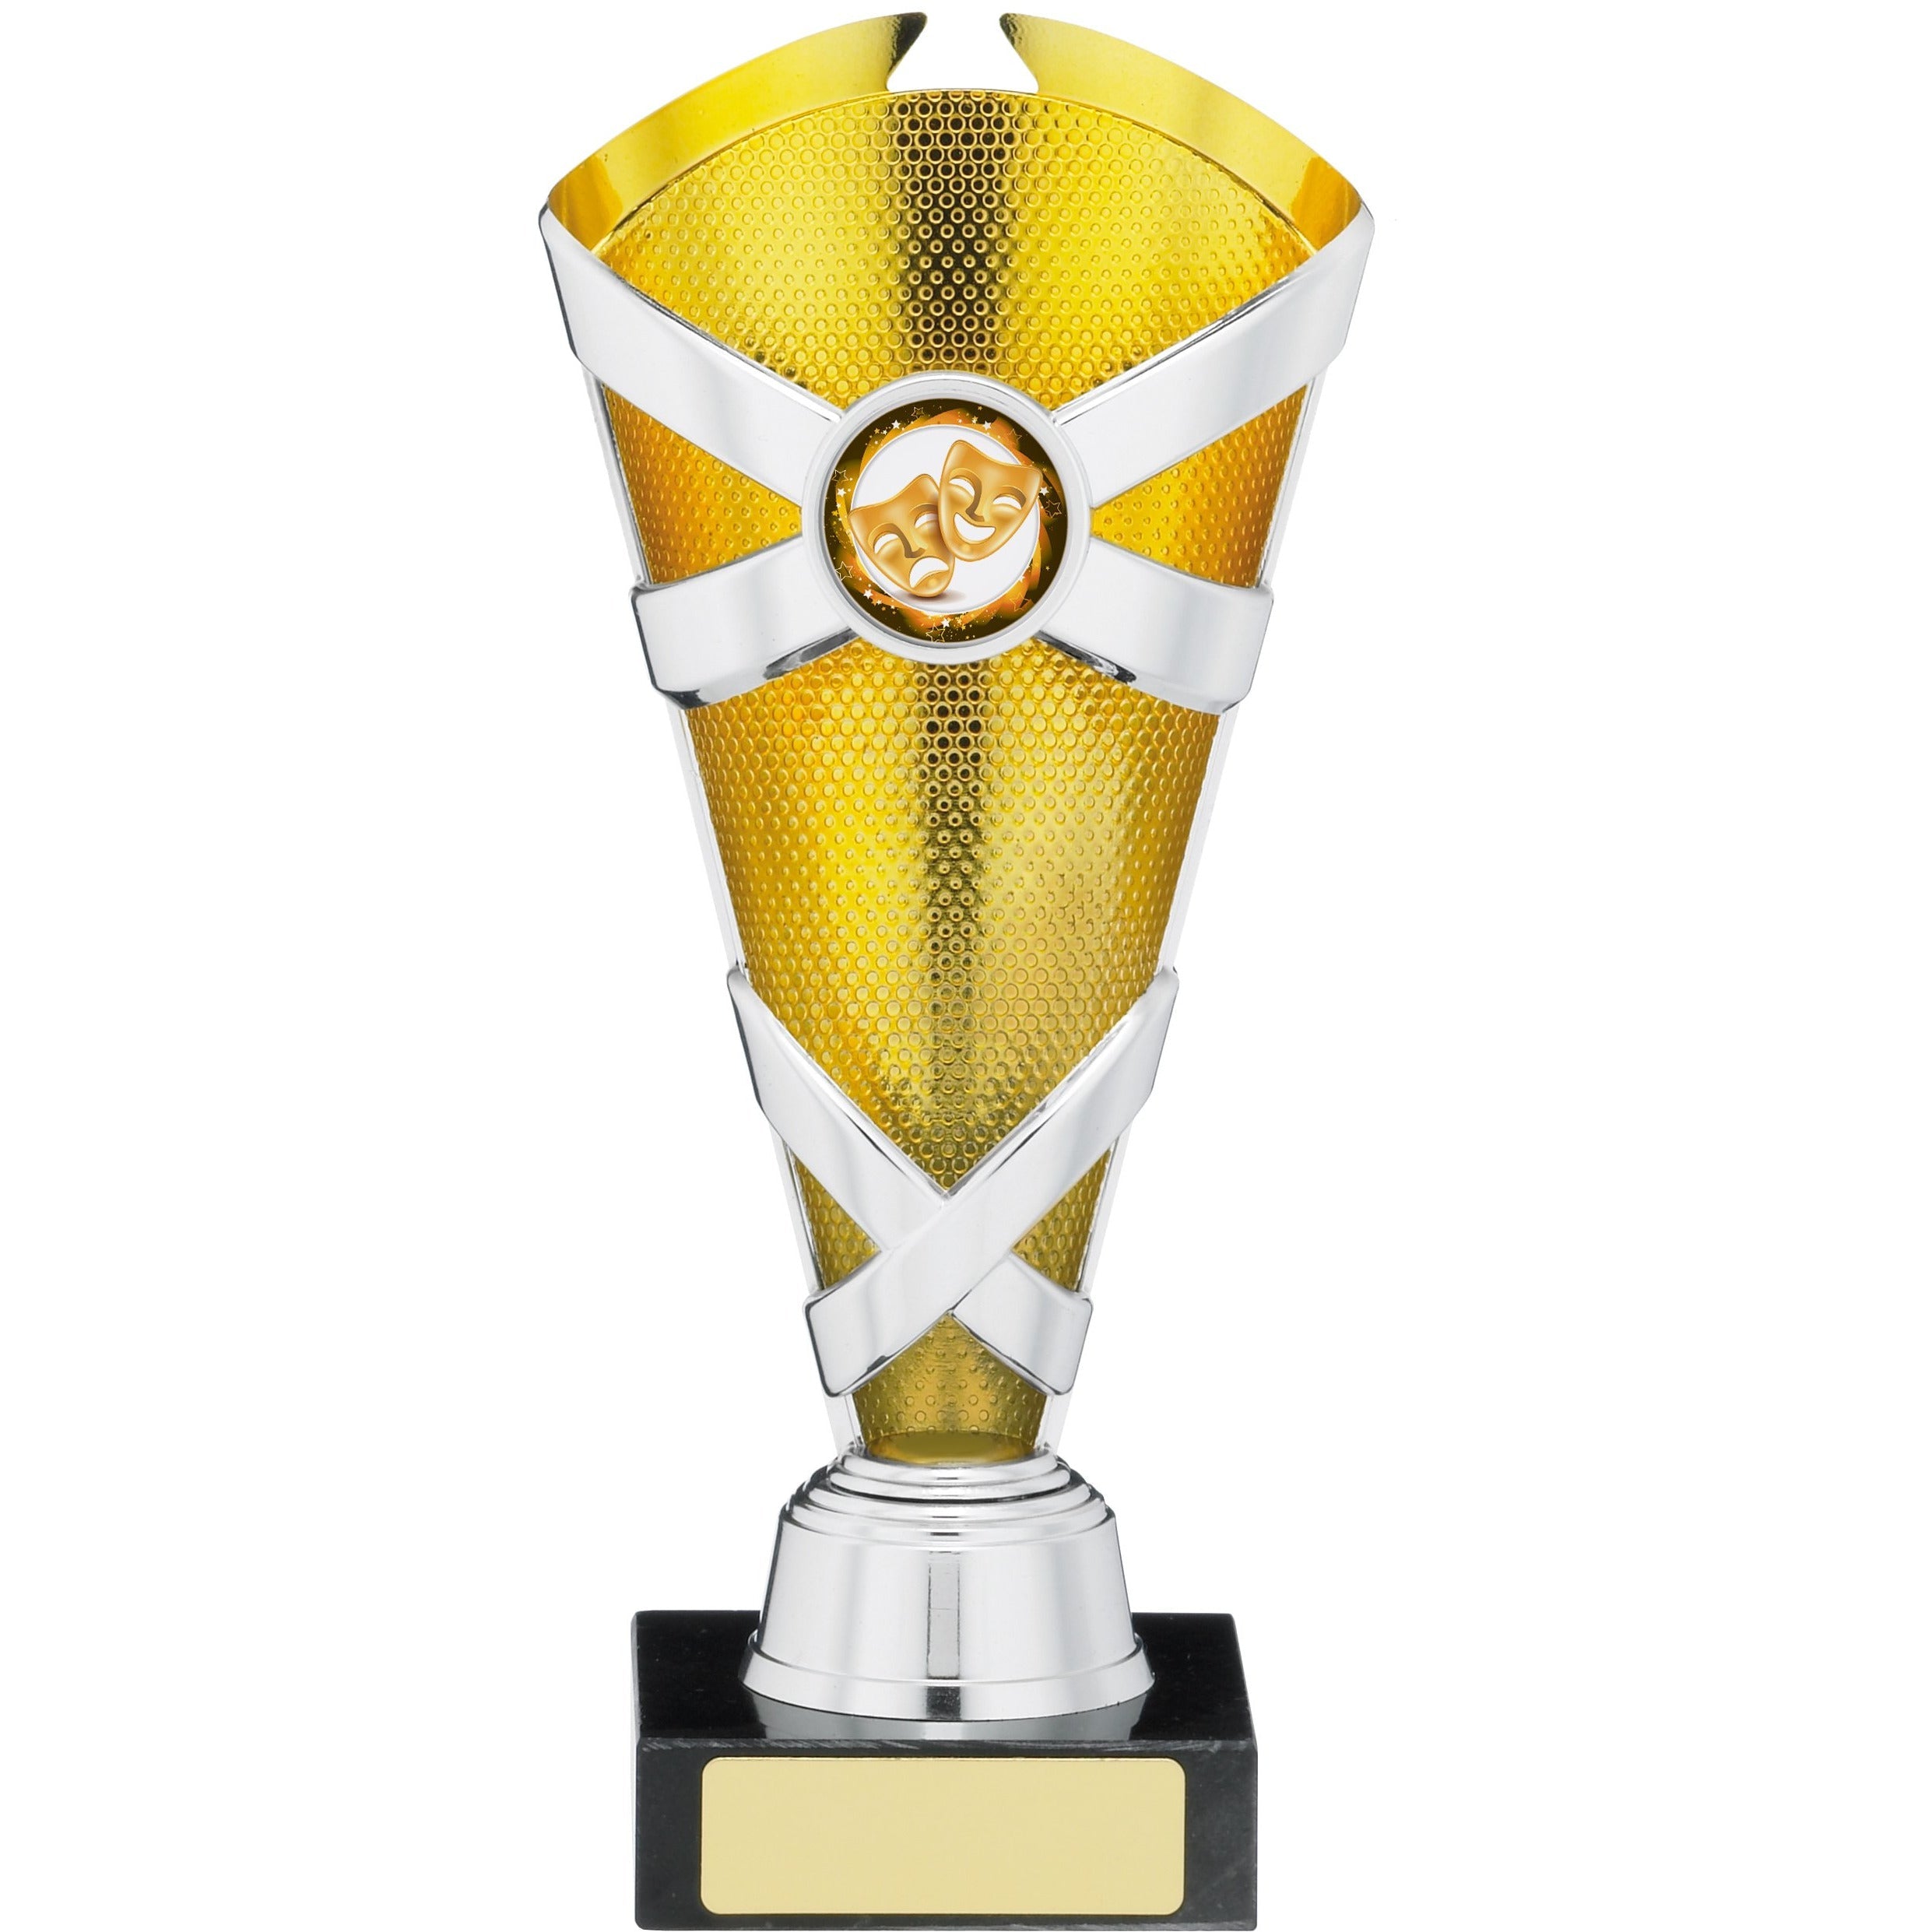 Criss Cross Plastic Trophy Cup - Gold and Silver